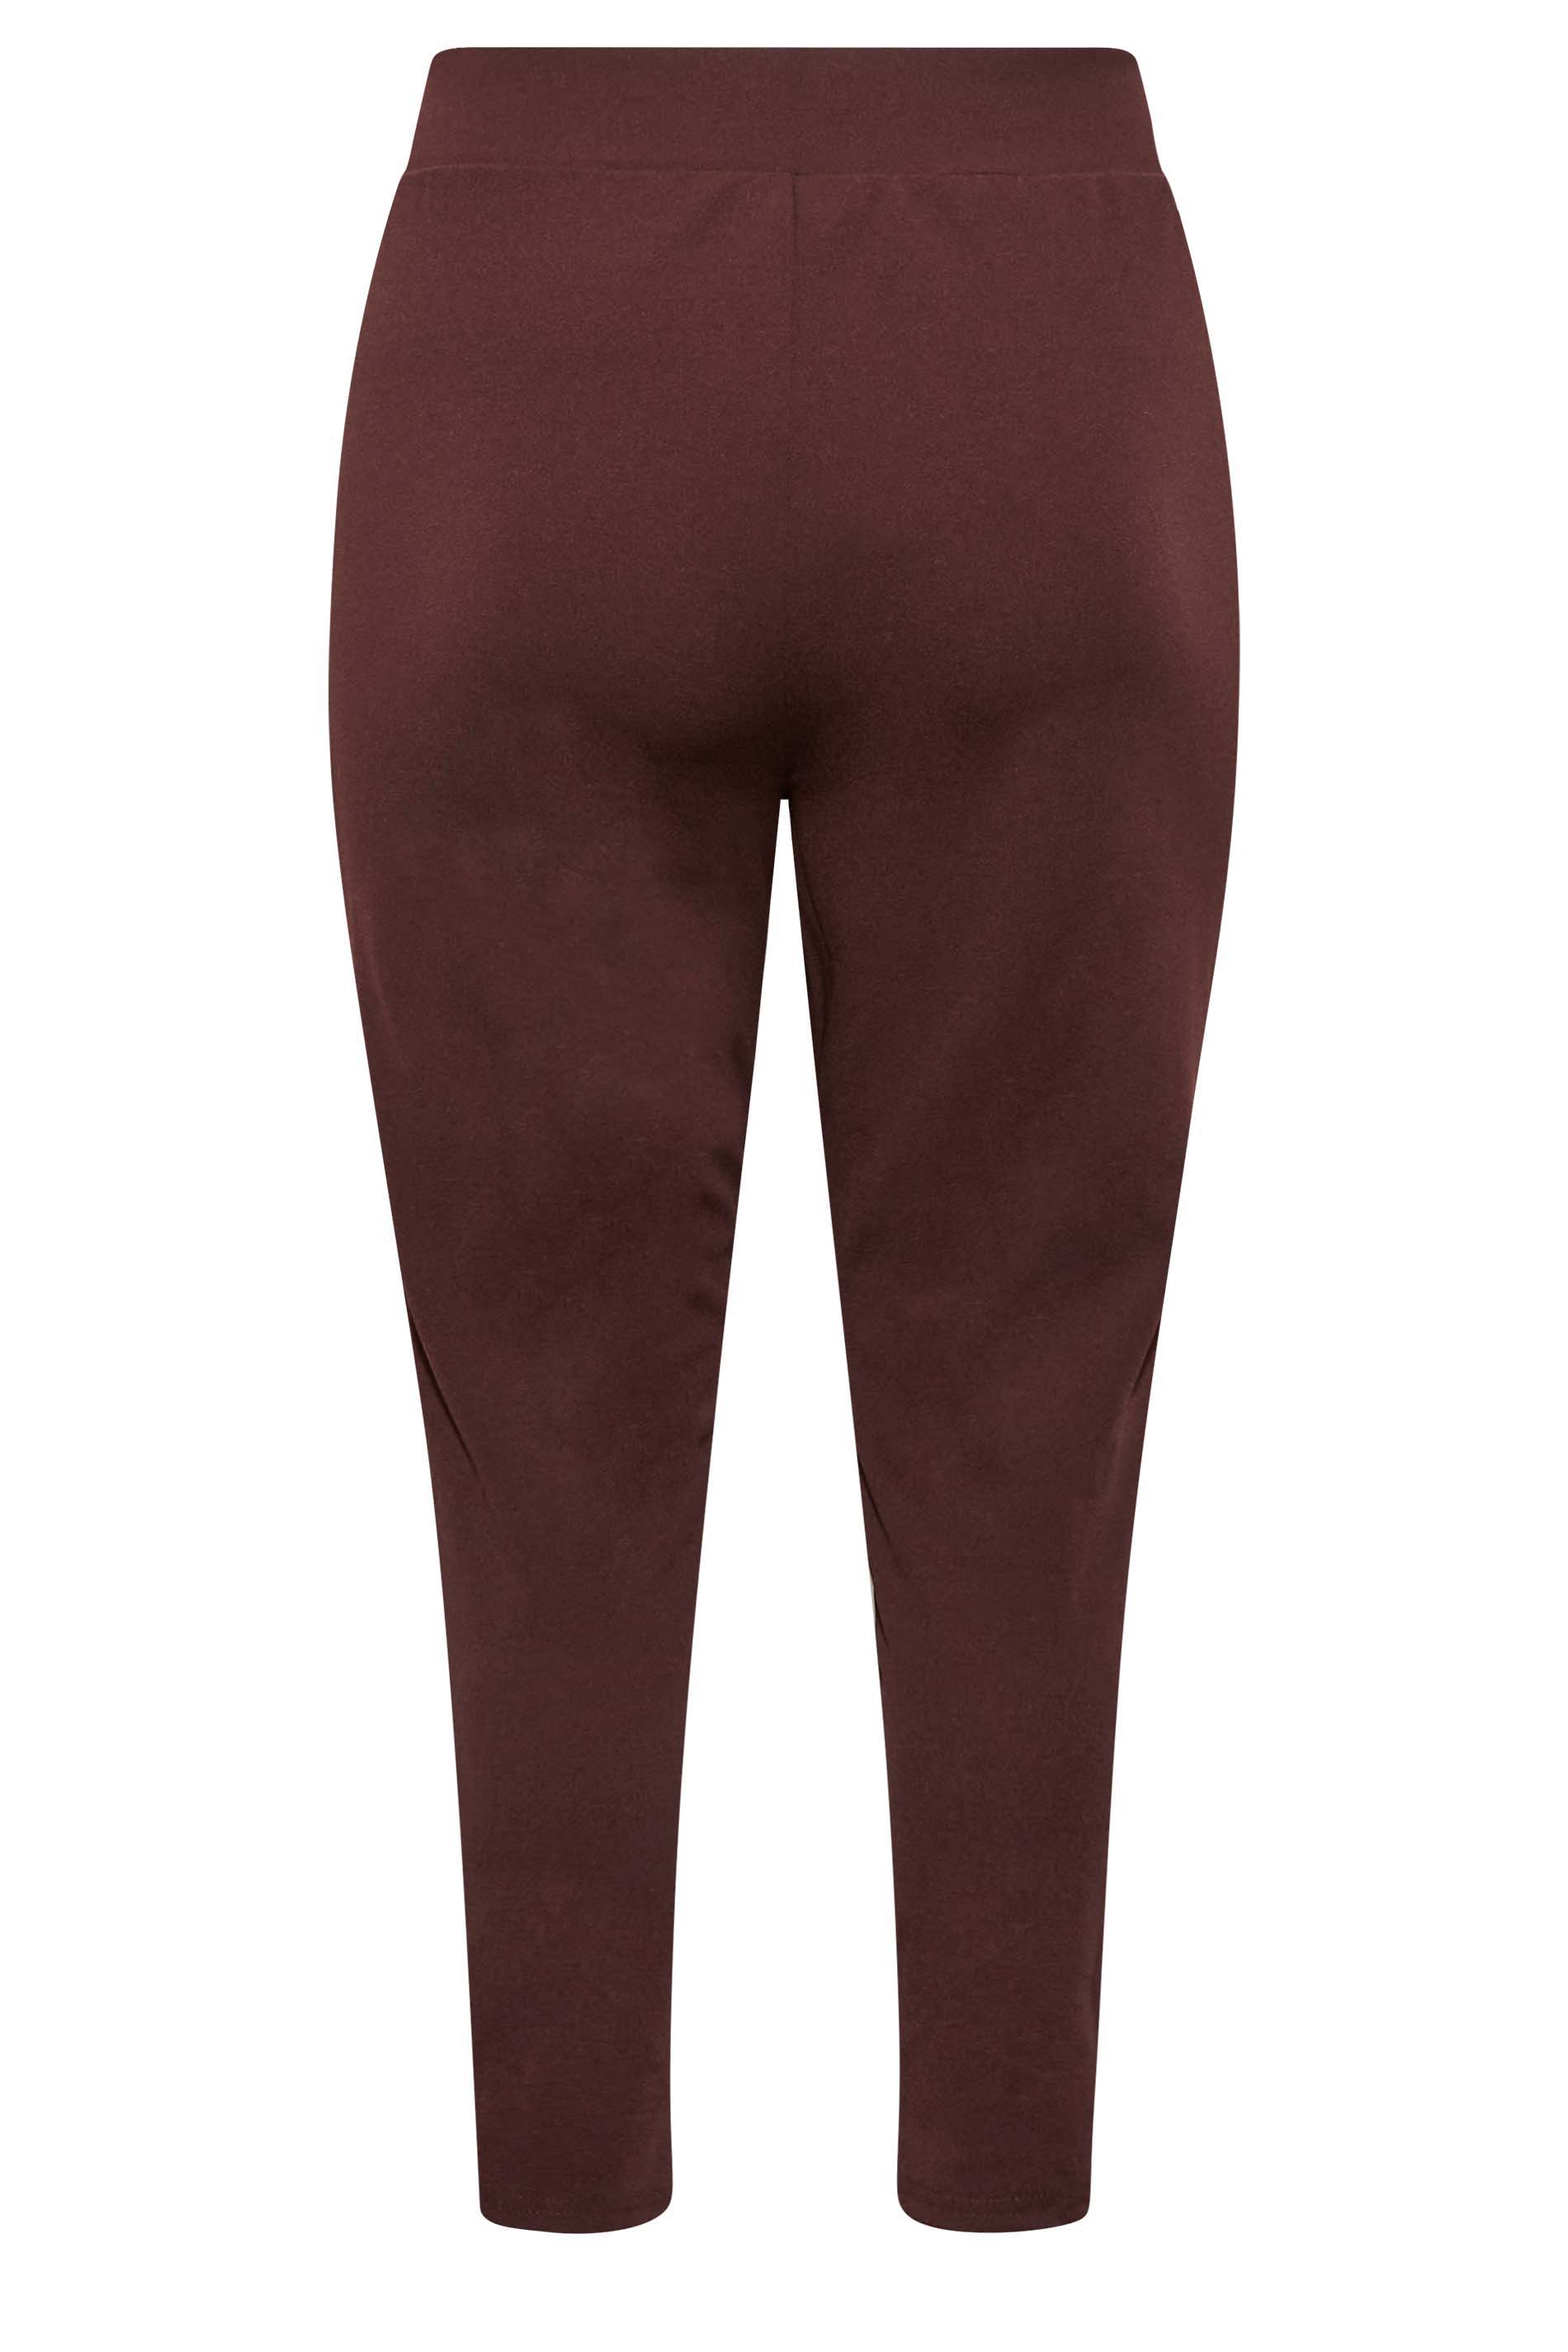 Plus Size Chocolate Brown Stretch Tapered Trousers - Petite | Yours ...